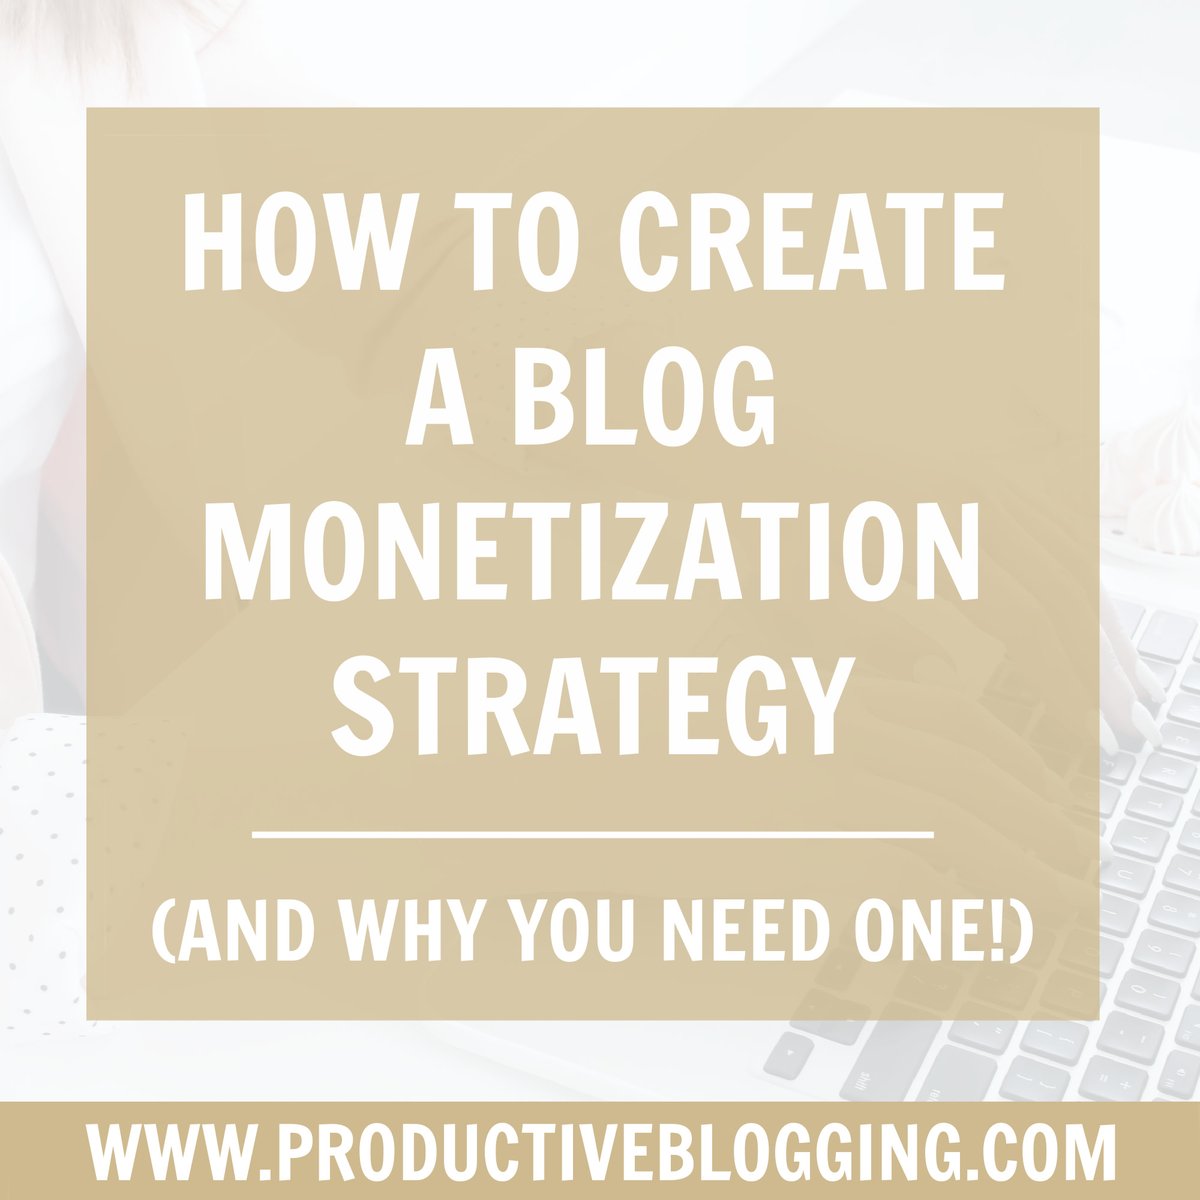 Blogging can be very lucrative. But money won't just land in your lap! 

You need to make a plan… and then put that plan into action. 

Here's how to create a blog monetization strategy (and why you need one!) >>> bit.ly/3OOay20

#blogmonetization #productiveblogging